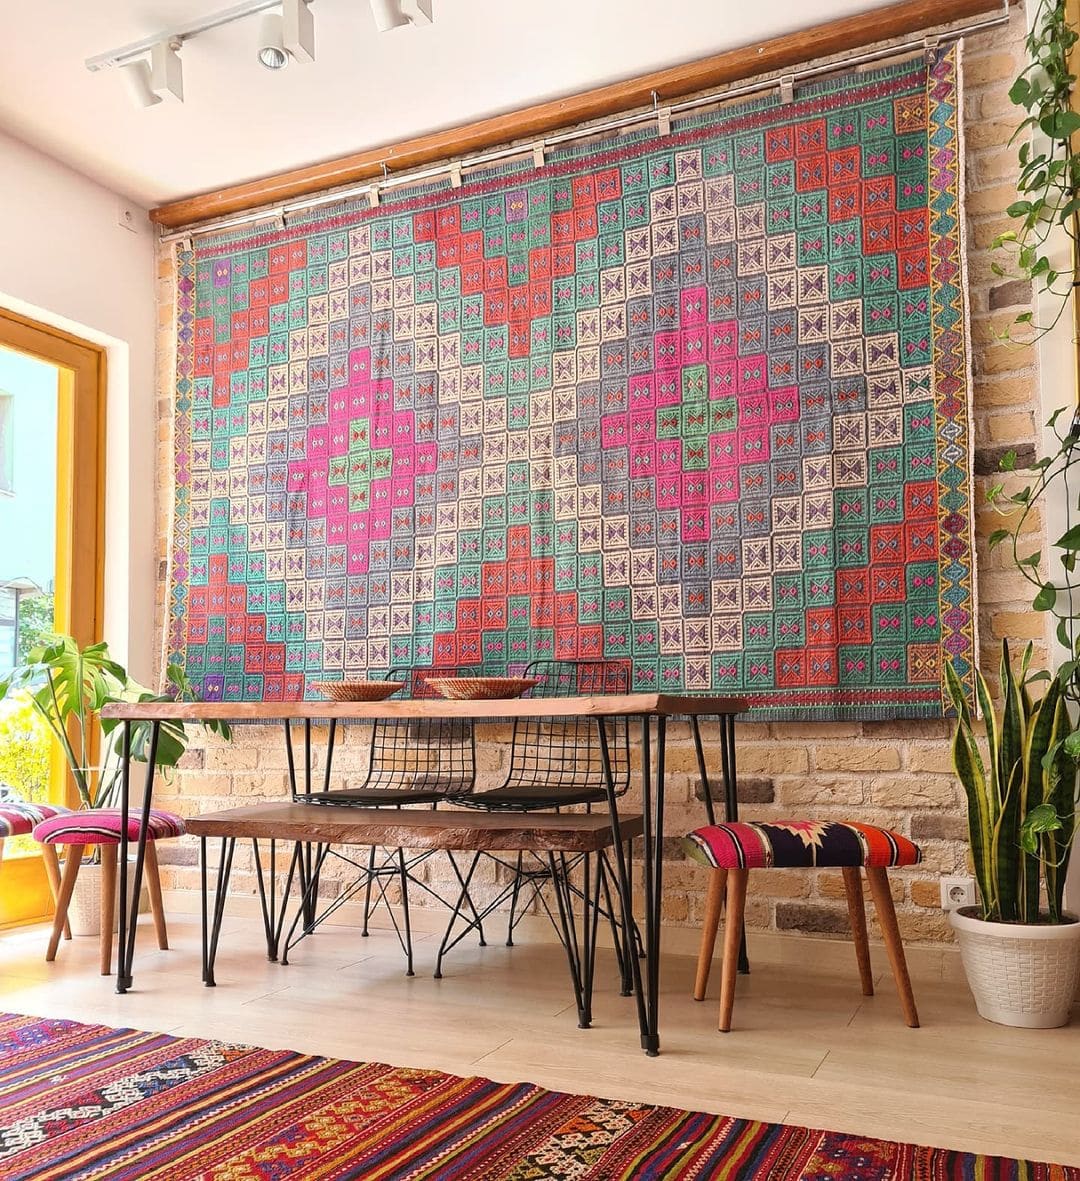 Vintage handwoven Cecim Kilim Rug with faded hues in pink, red and green on the wall